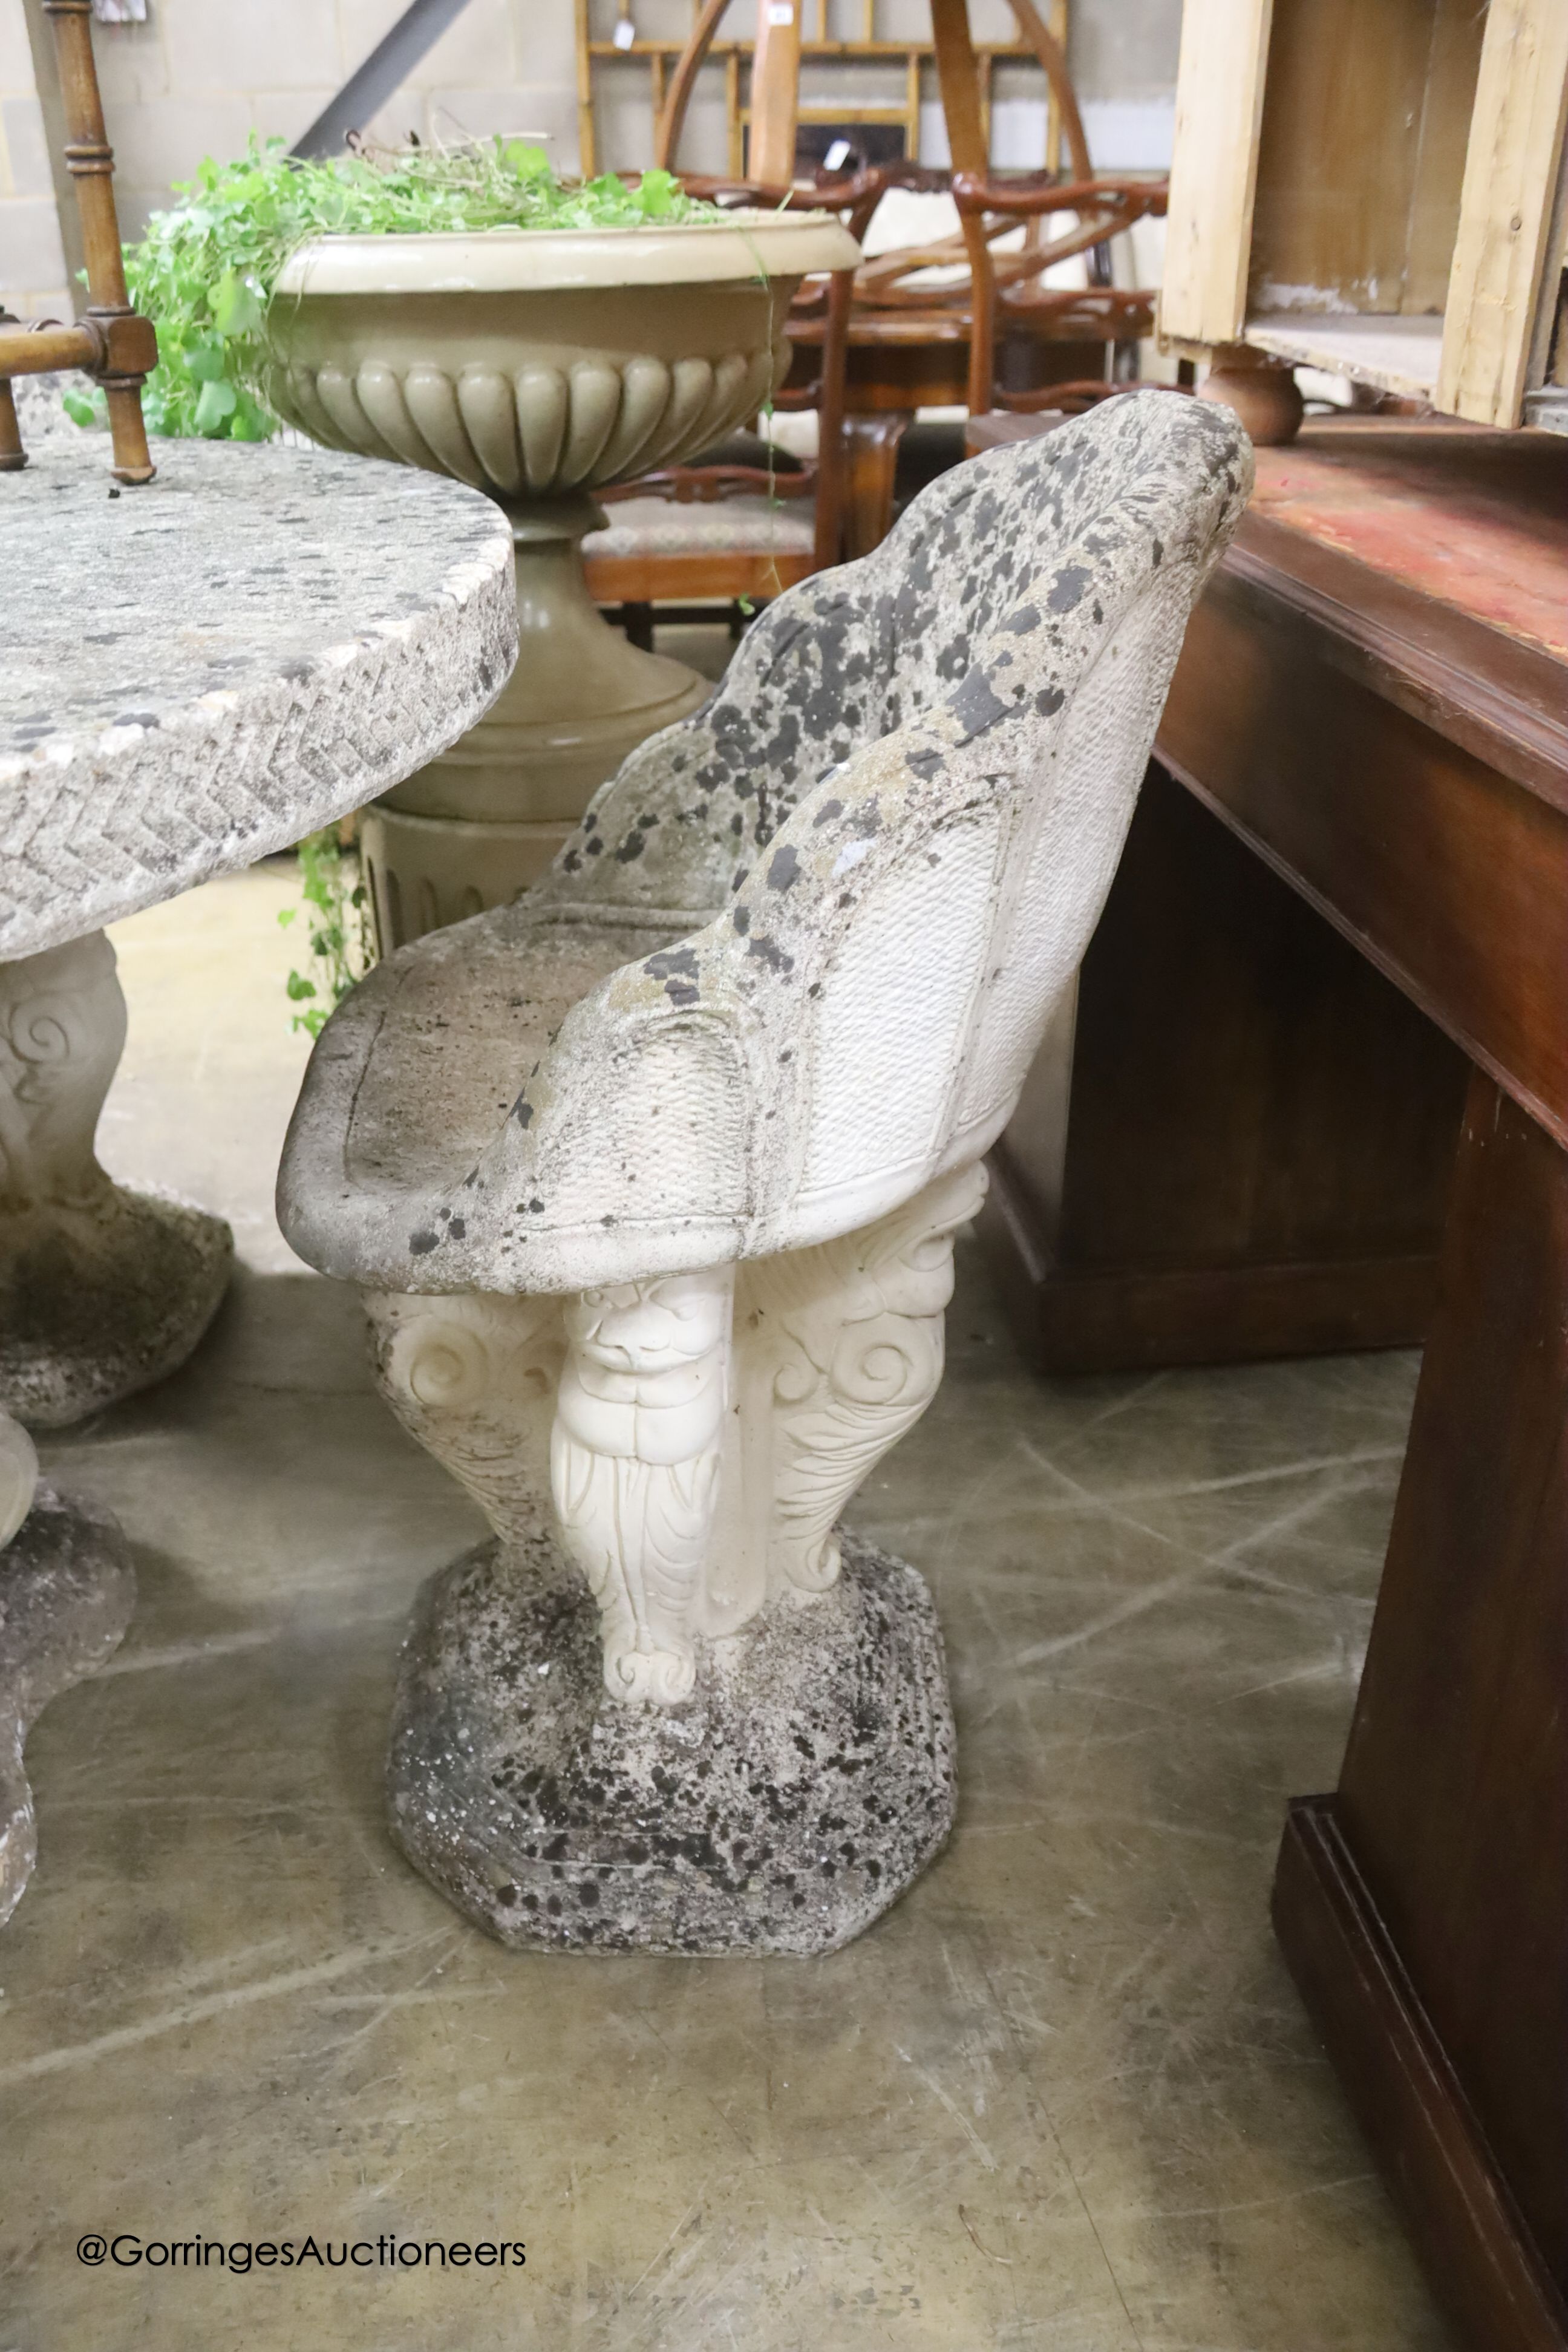 A circular reconstituted stone circular garden table, diameter 114cm, height 79cm and four matching chairs